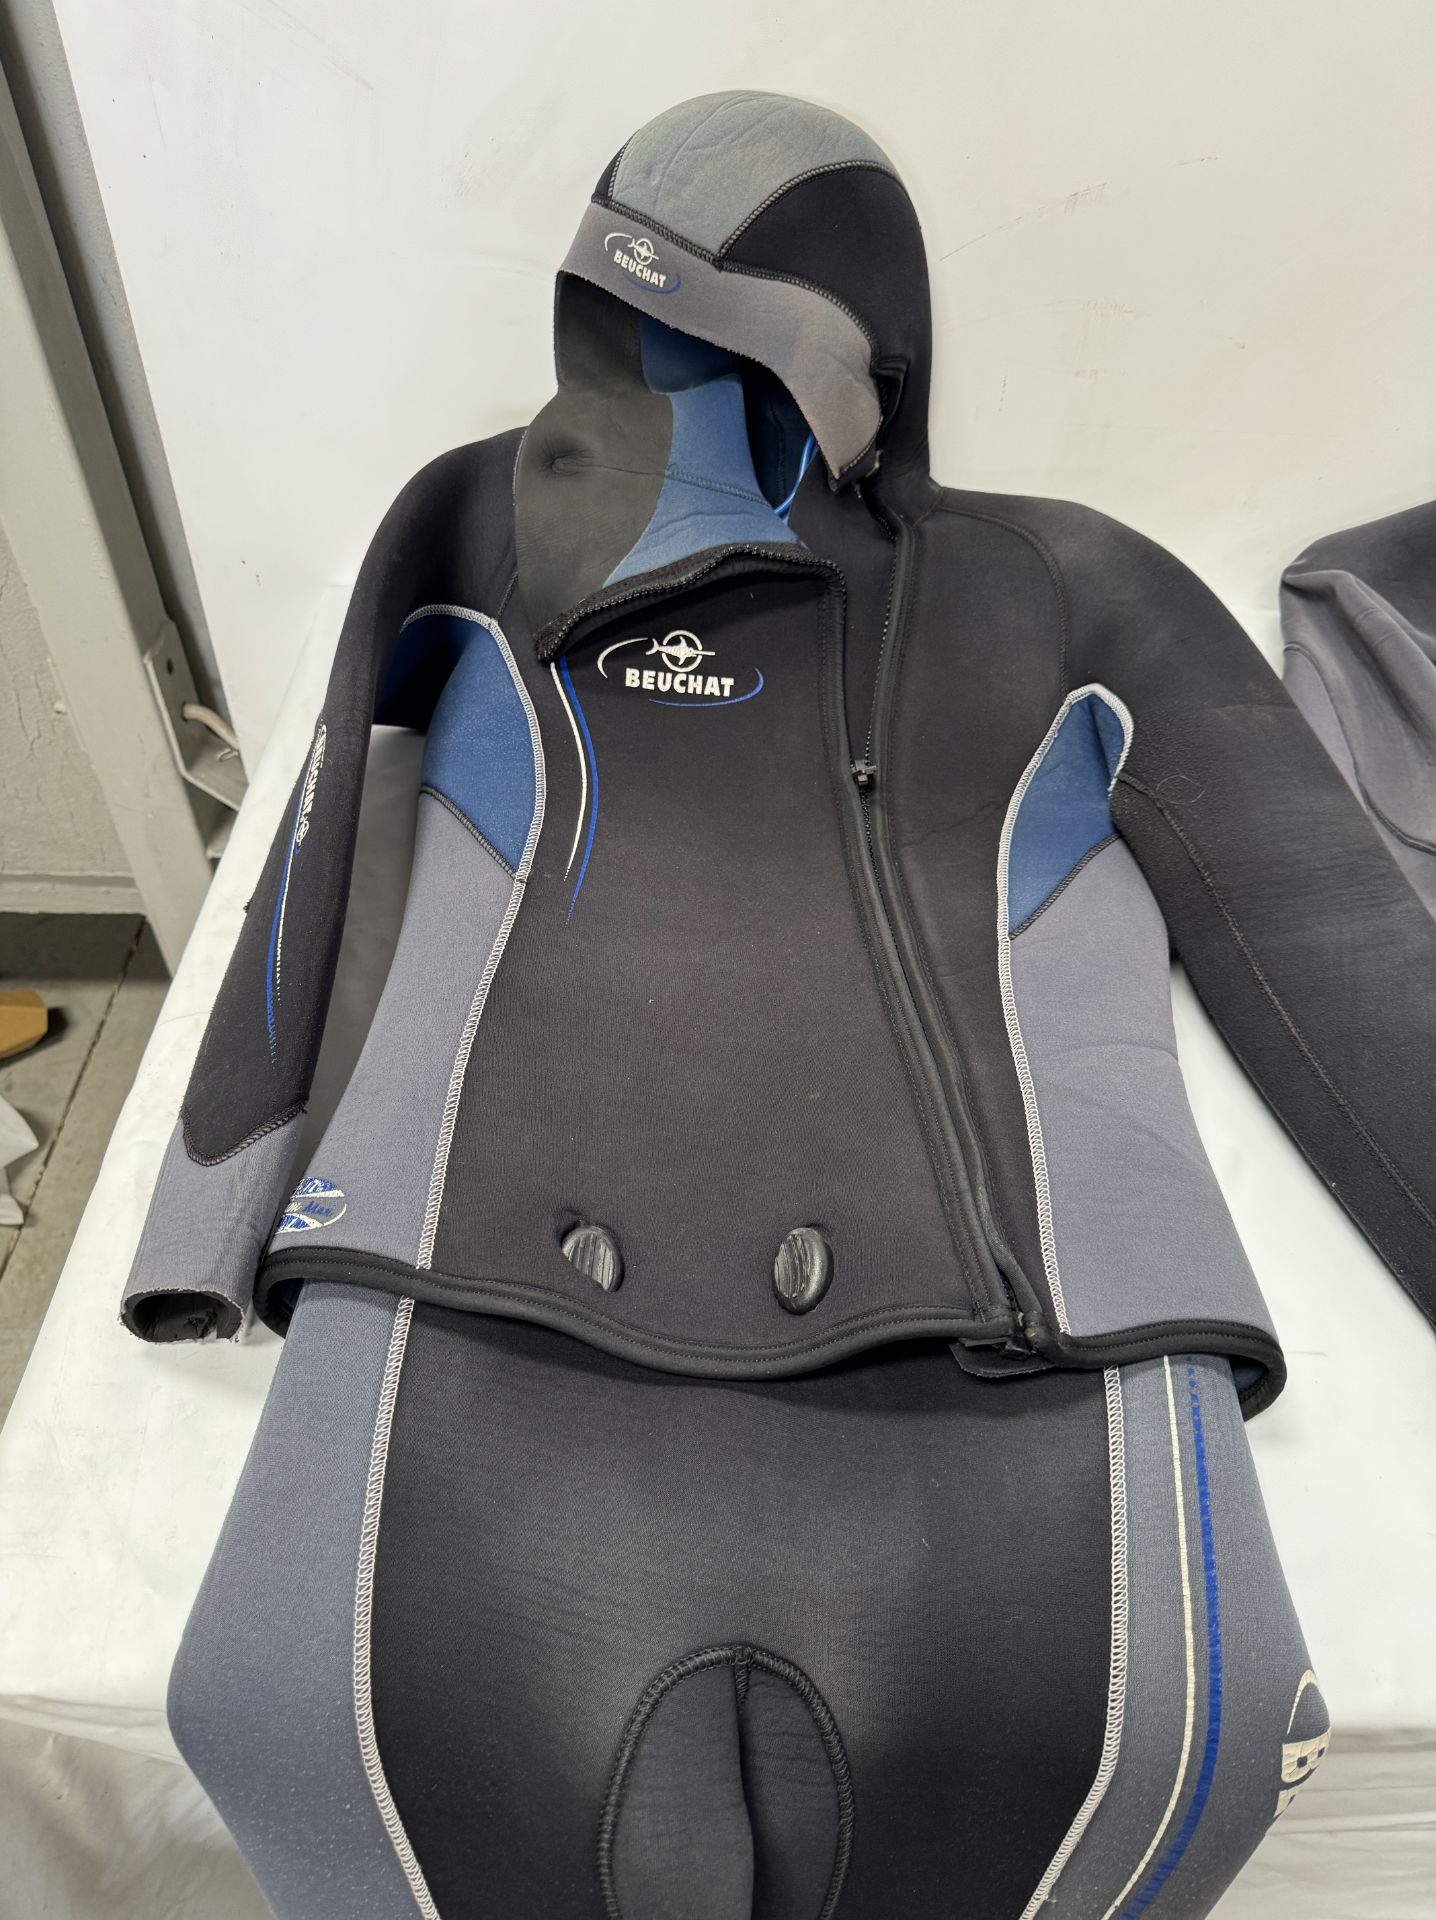 Six O’Neill, Beuchat, Seac Wetsuits (Location: Brentwood. Please Refer to General Notes) - Image 2 of 18